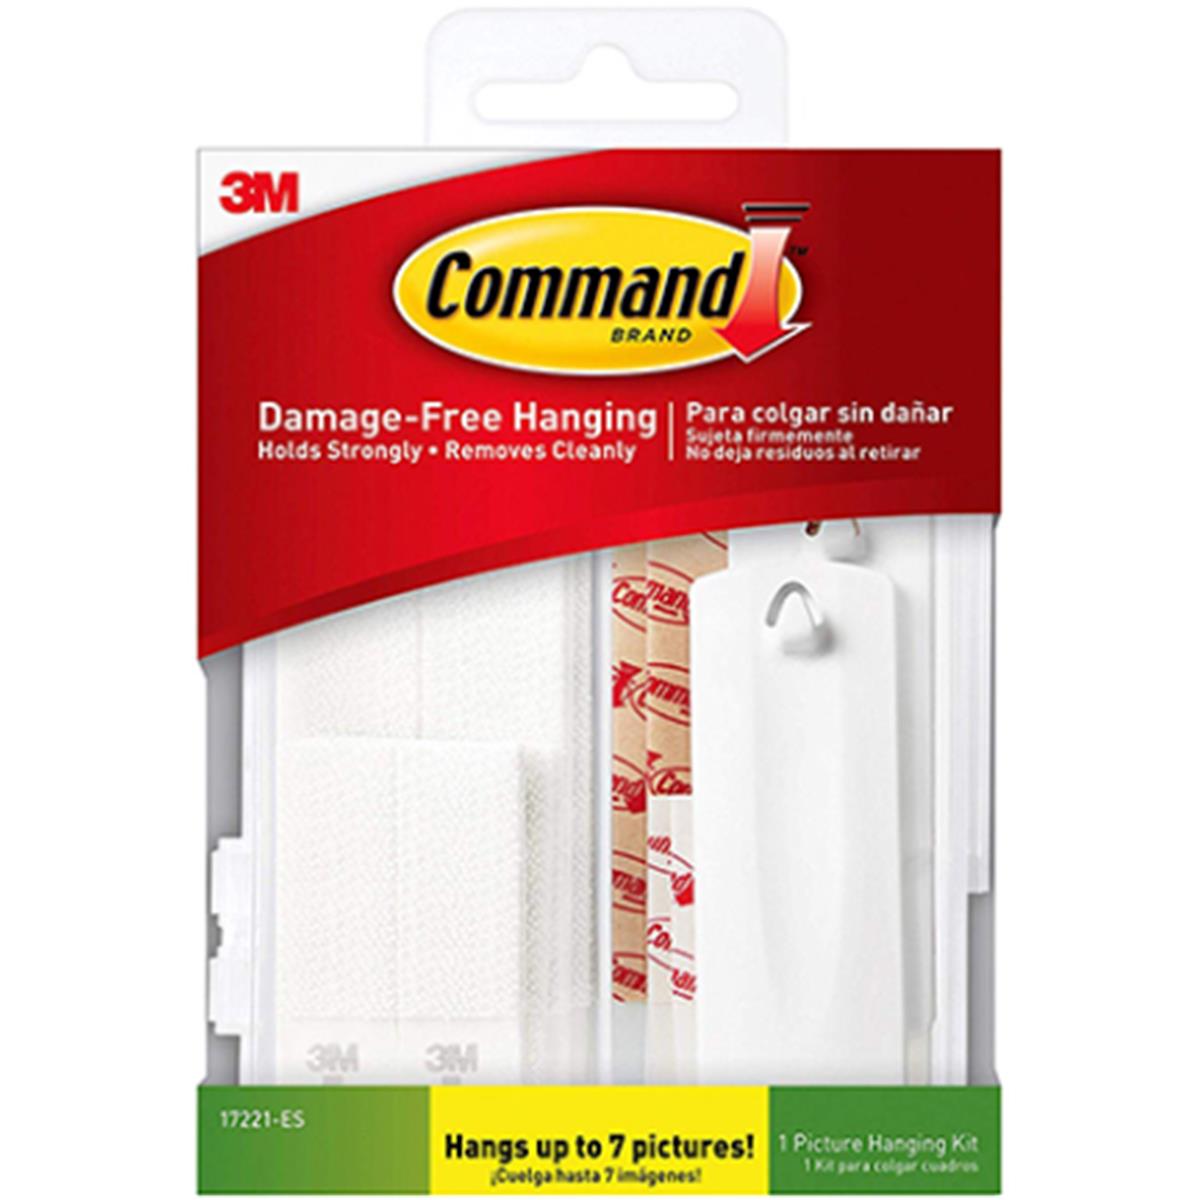 Picture of 3M 17221-ES Command Picture Hanging Kit, White - Piece of 24